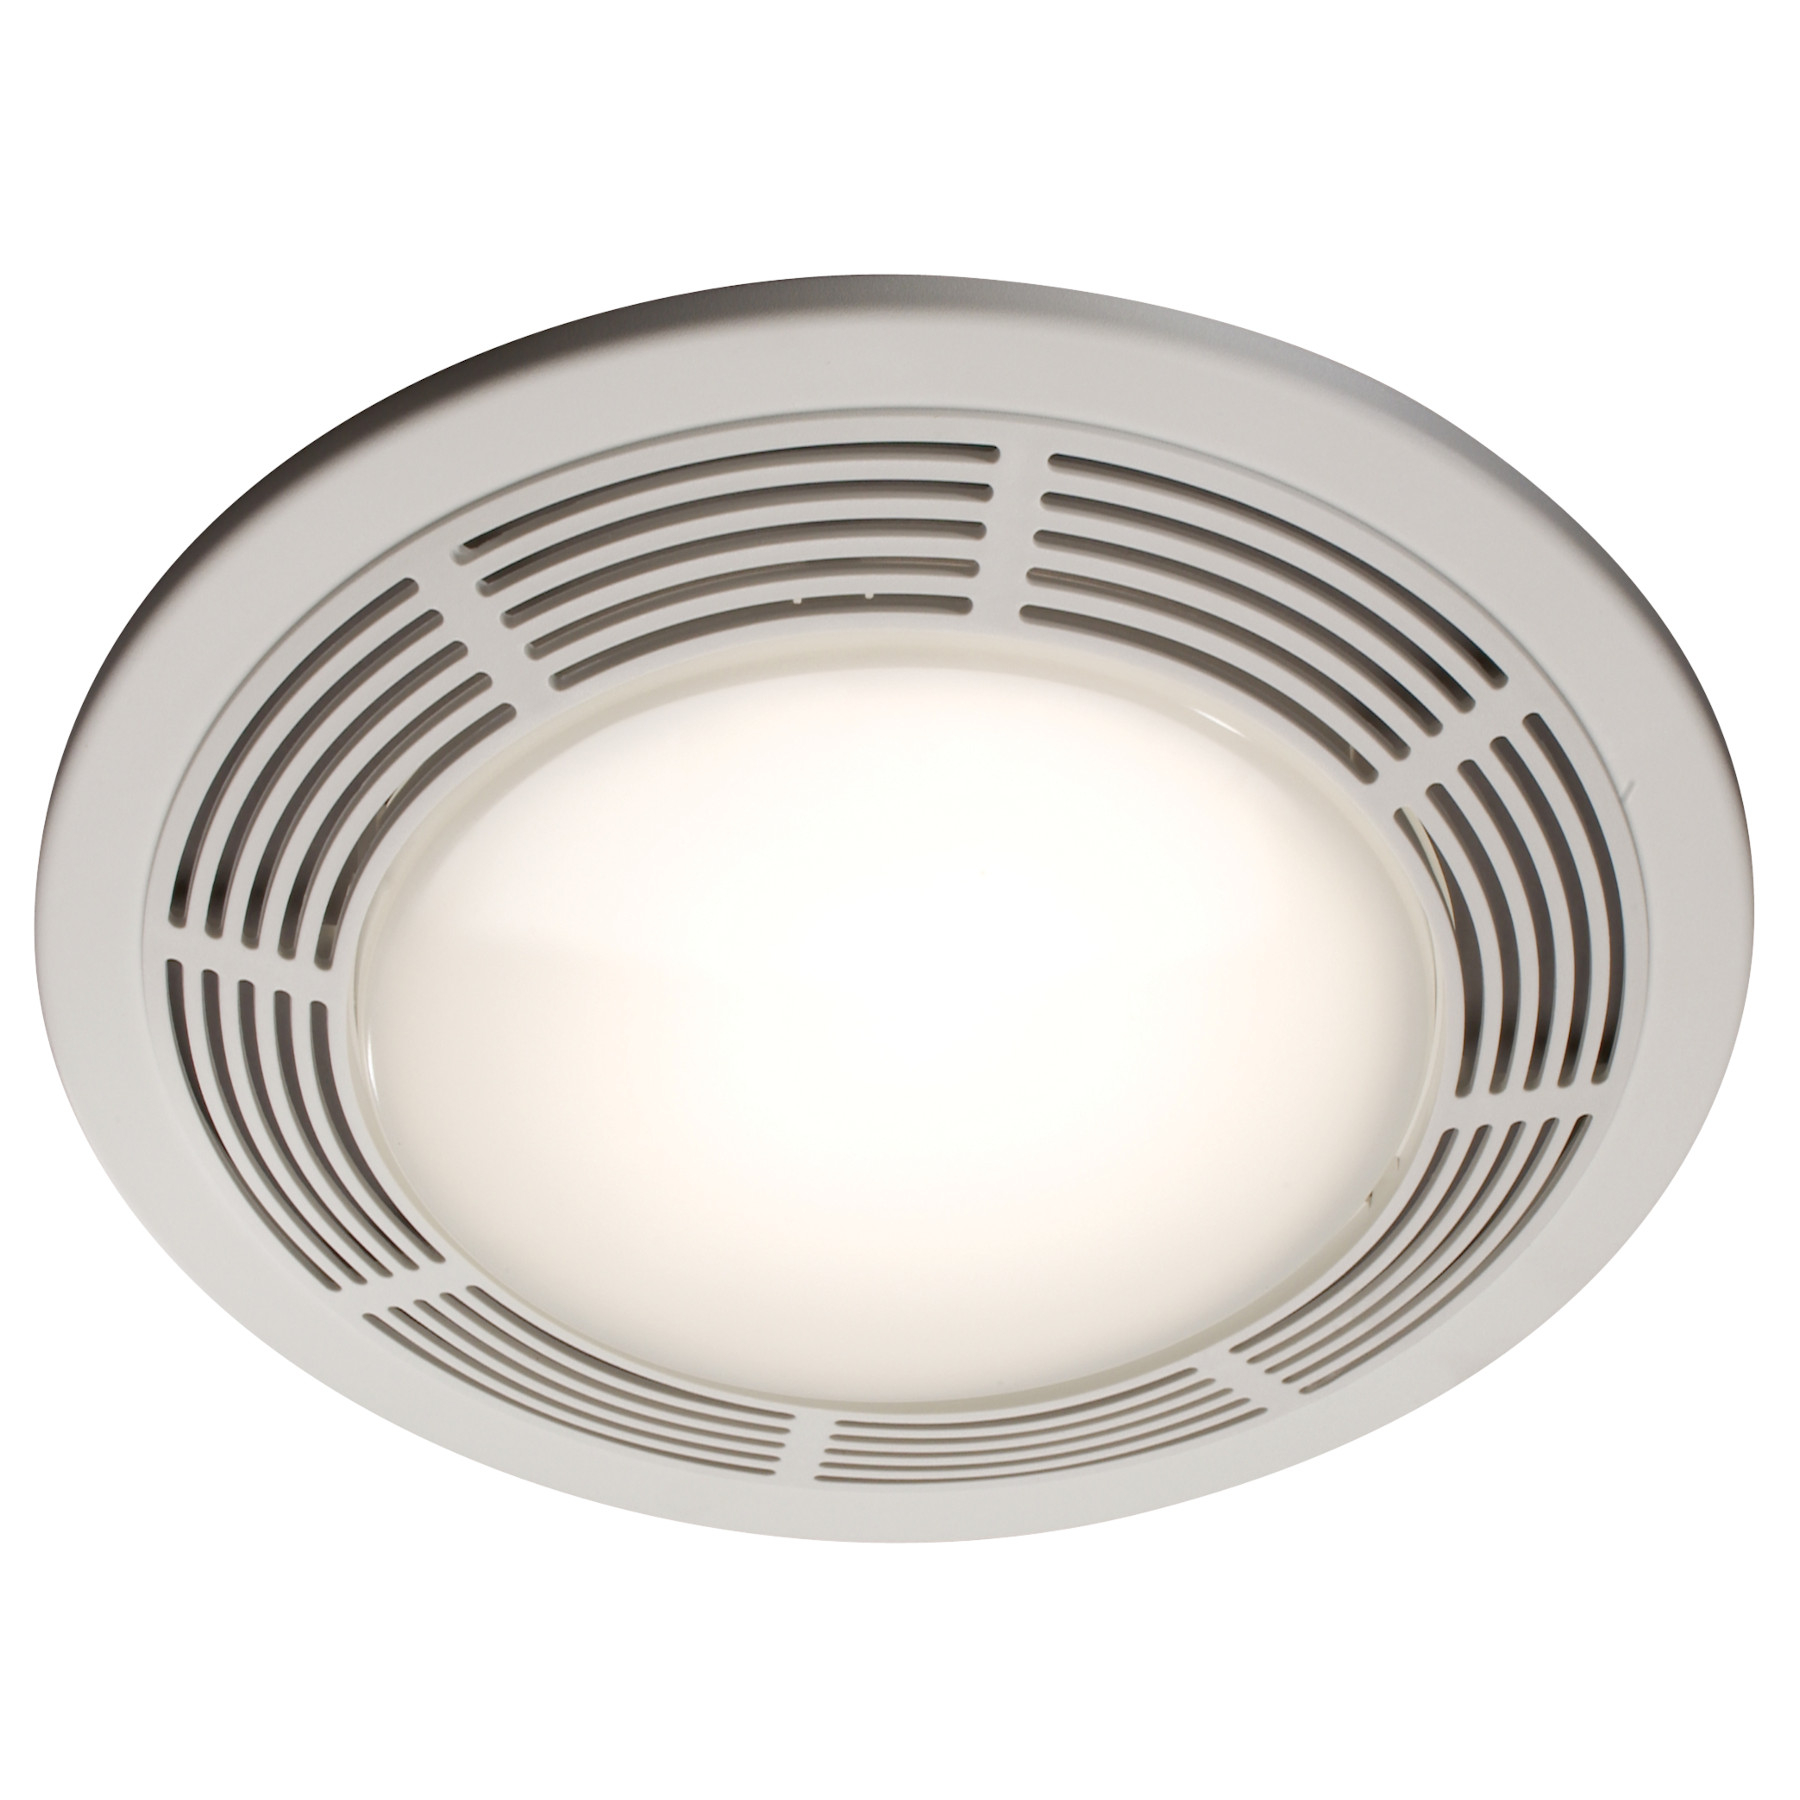 8664rp Nutone Ventilation Fan W Incandescent Lighting with dimensions 1800 X 1800